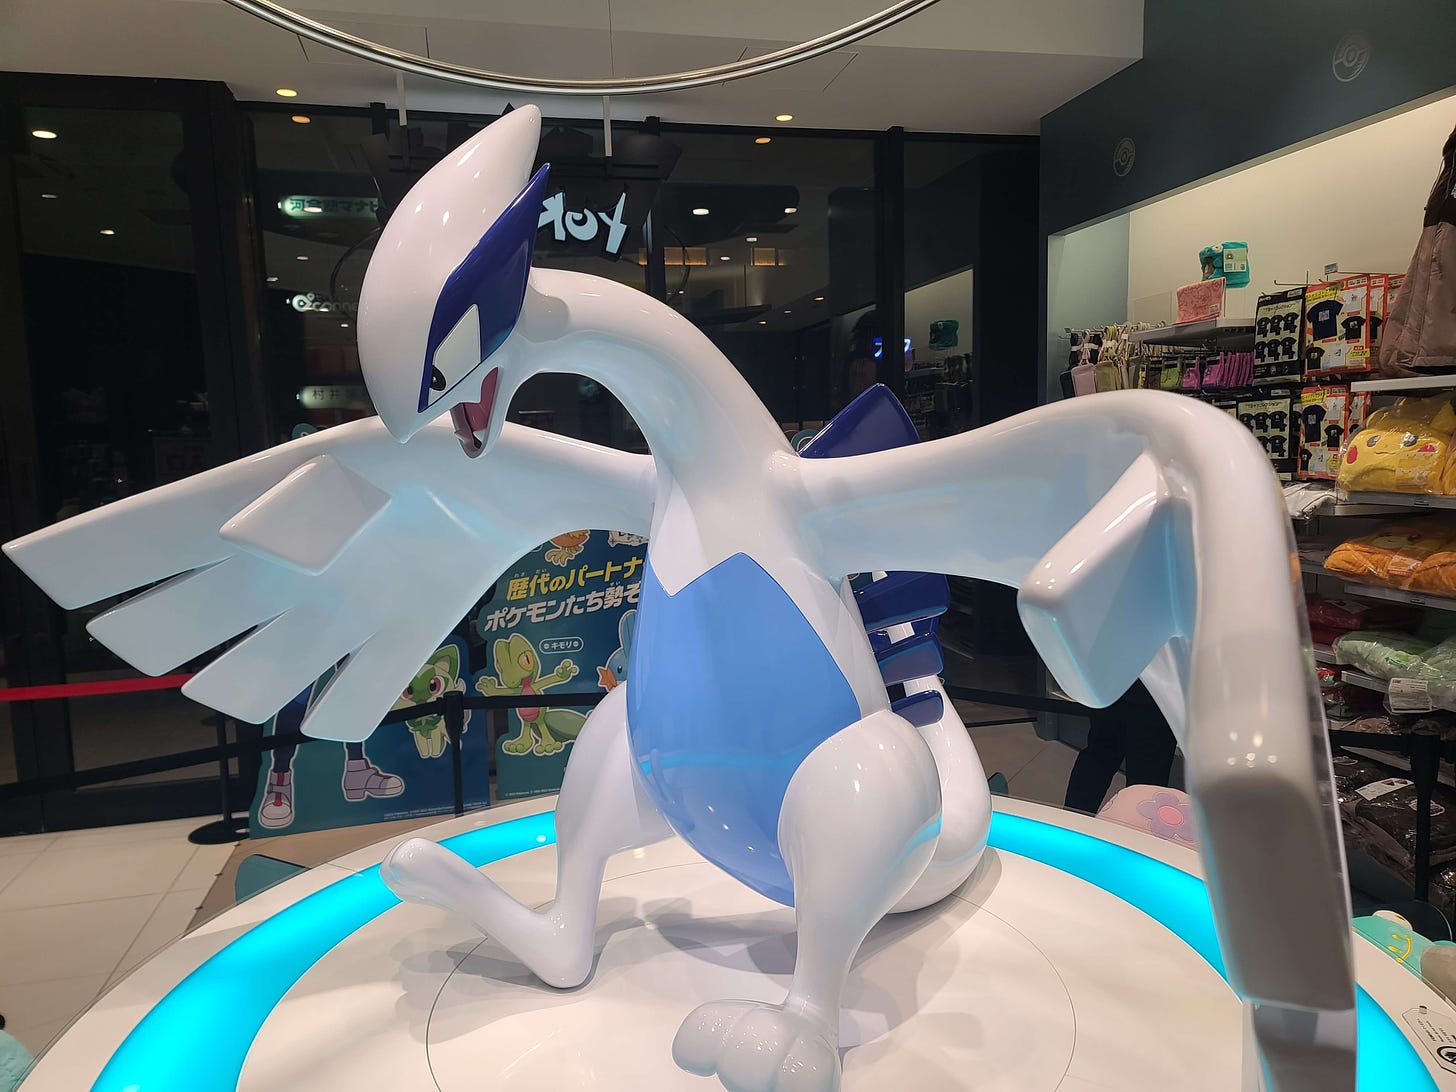 Lugia is the mascot for the Kyoto Pokémon Center store, represented by this impressive statue